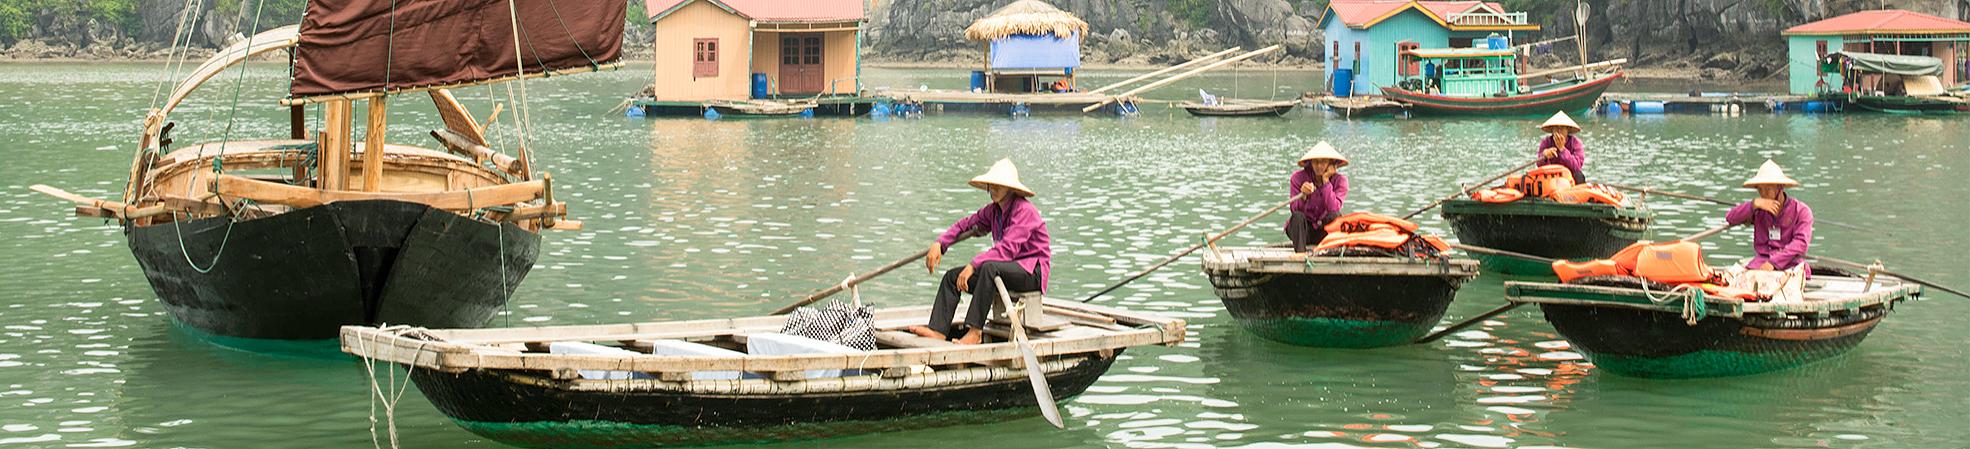 Top things to do with kids in Vietnam